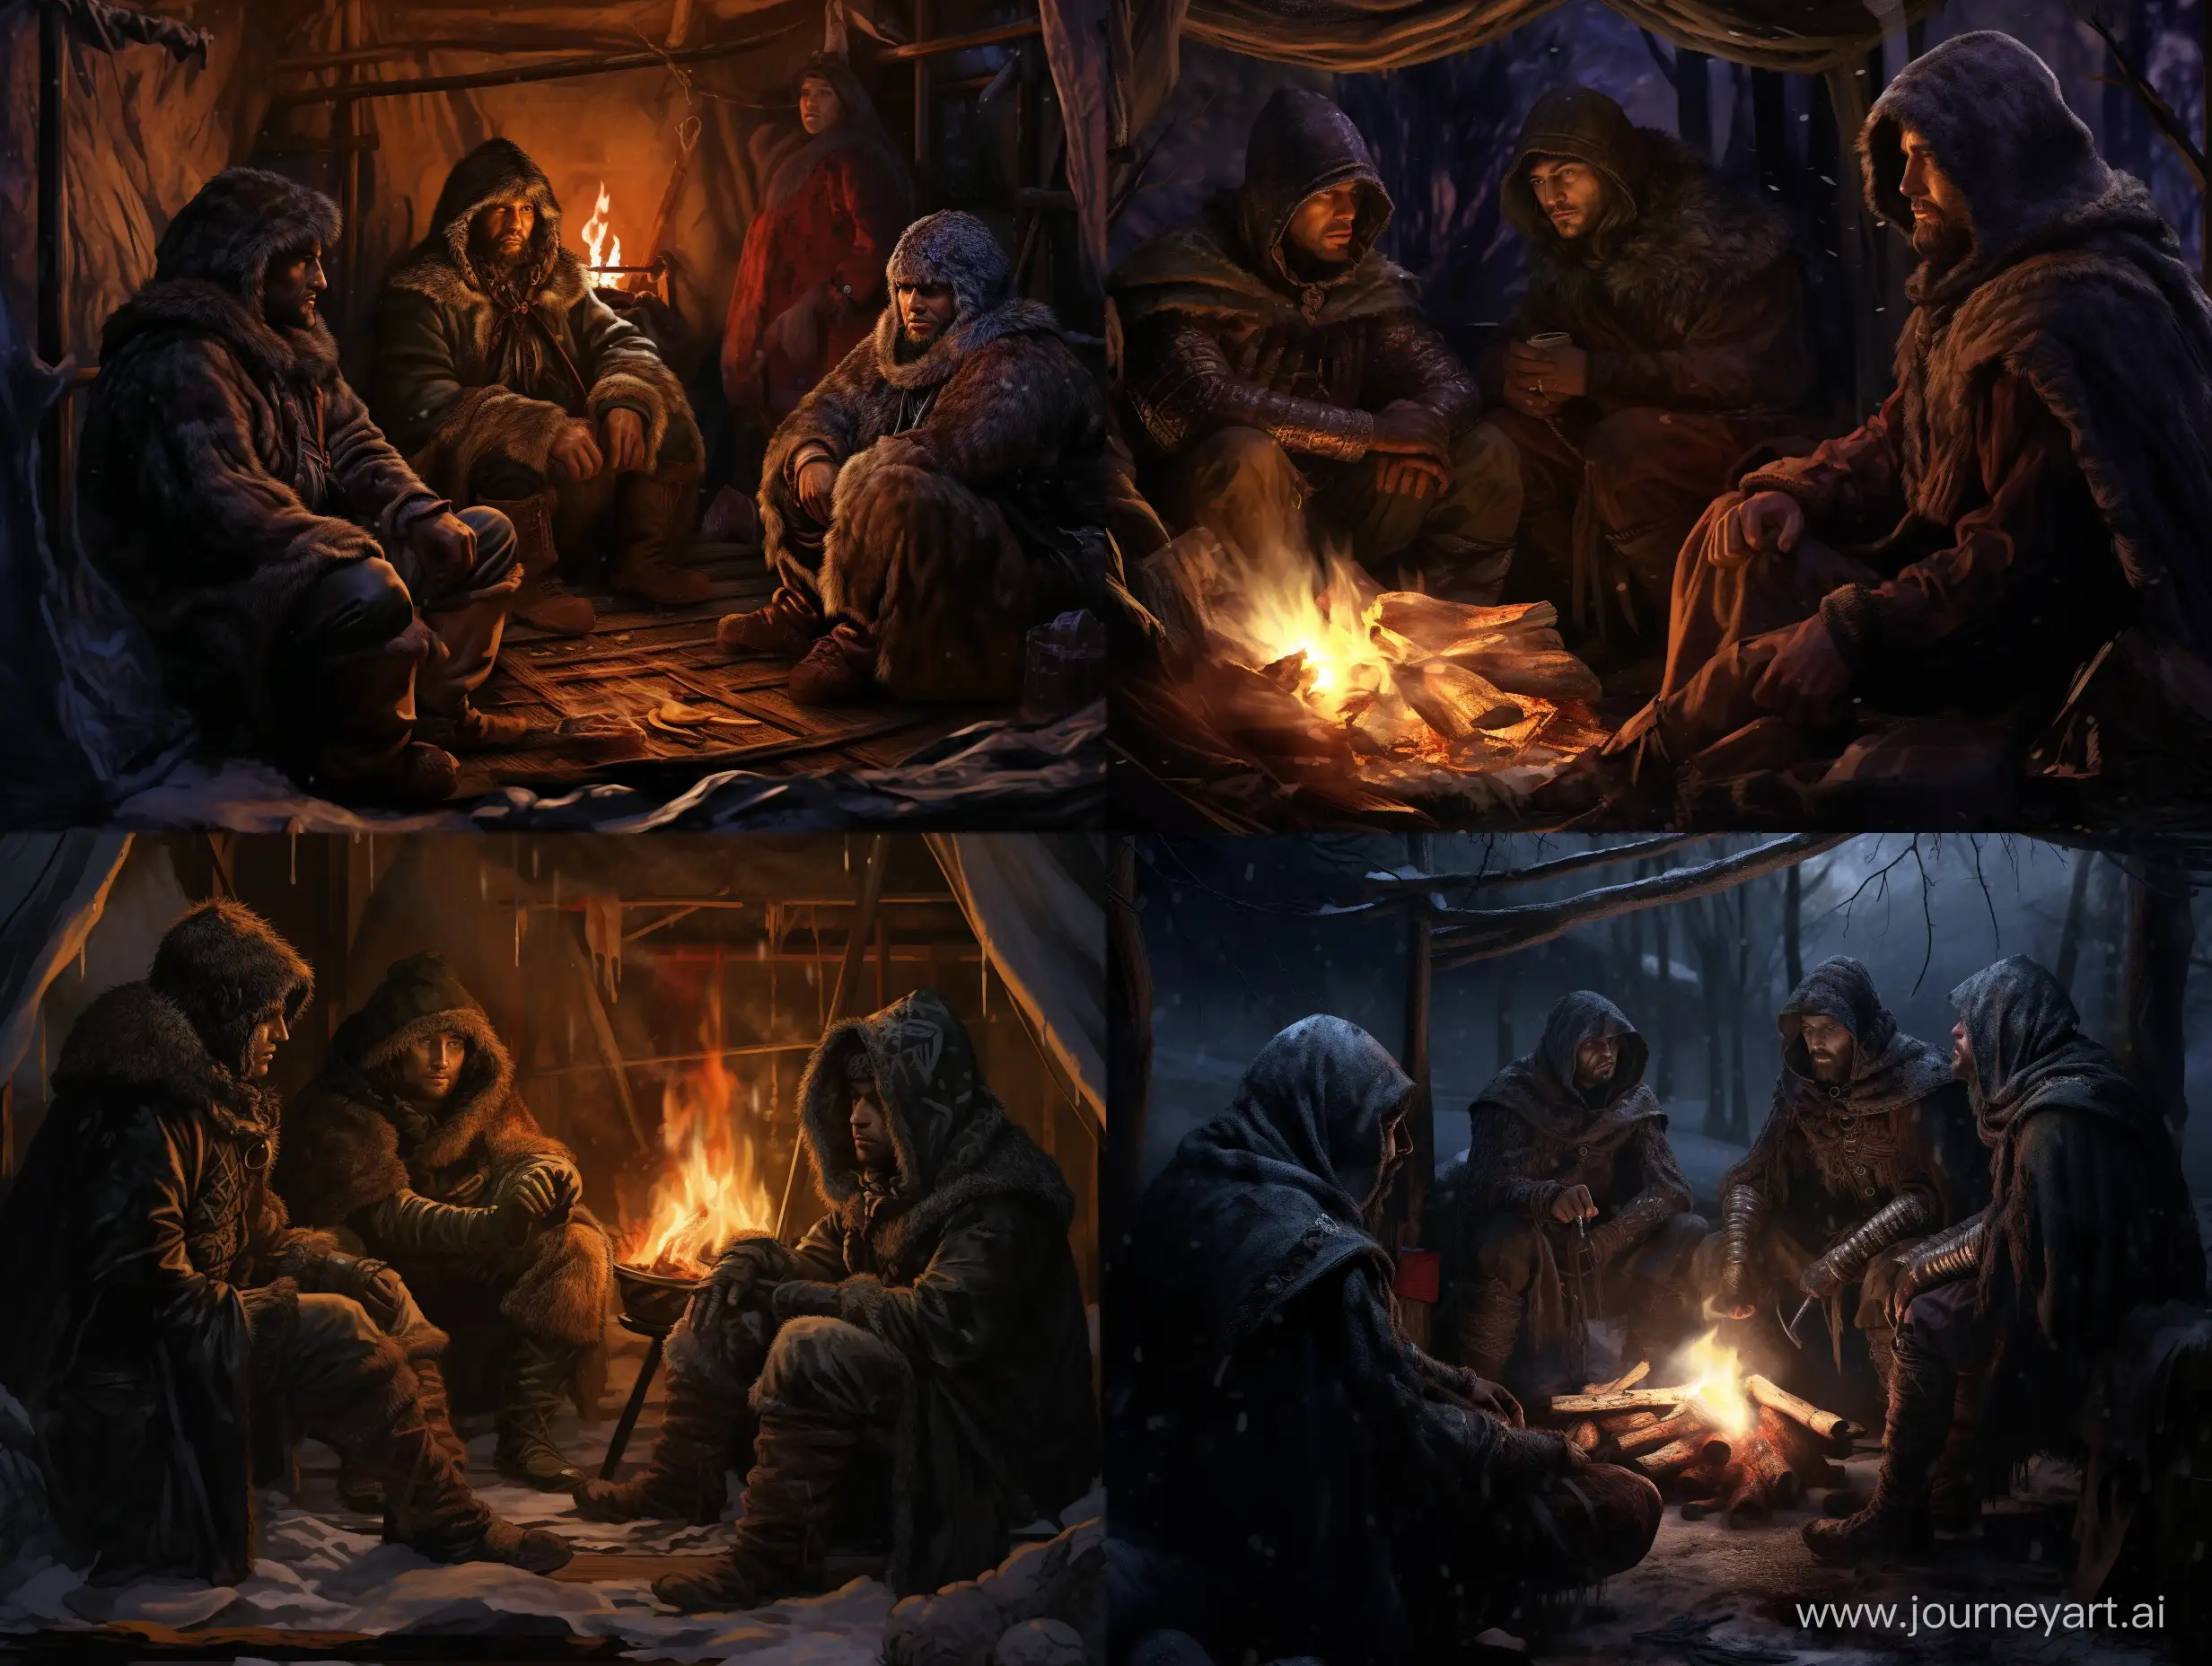 Medieval-Hunters-Resting-by-the-Fire-in-Dark-Fantasy-Setting